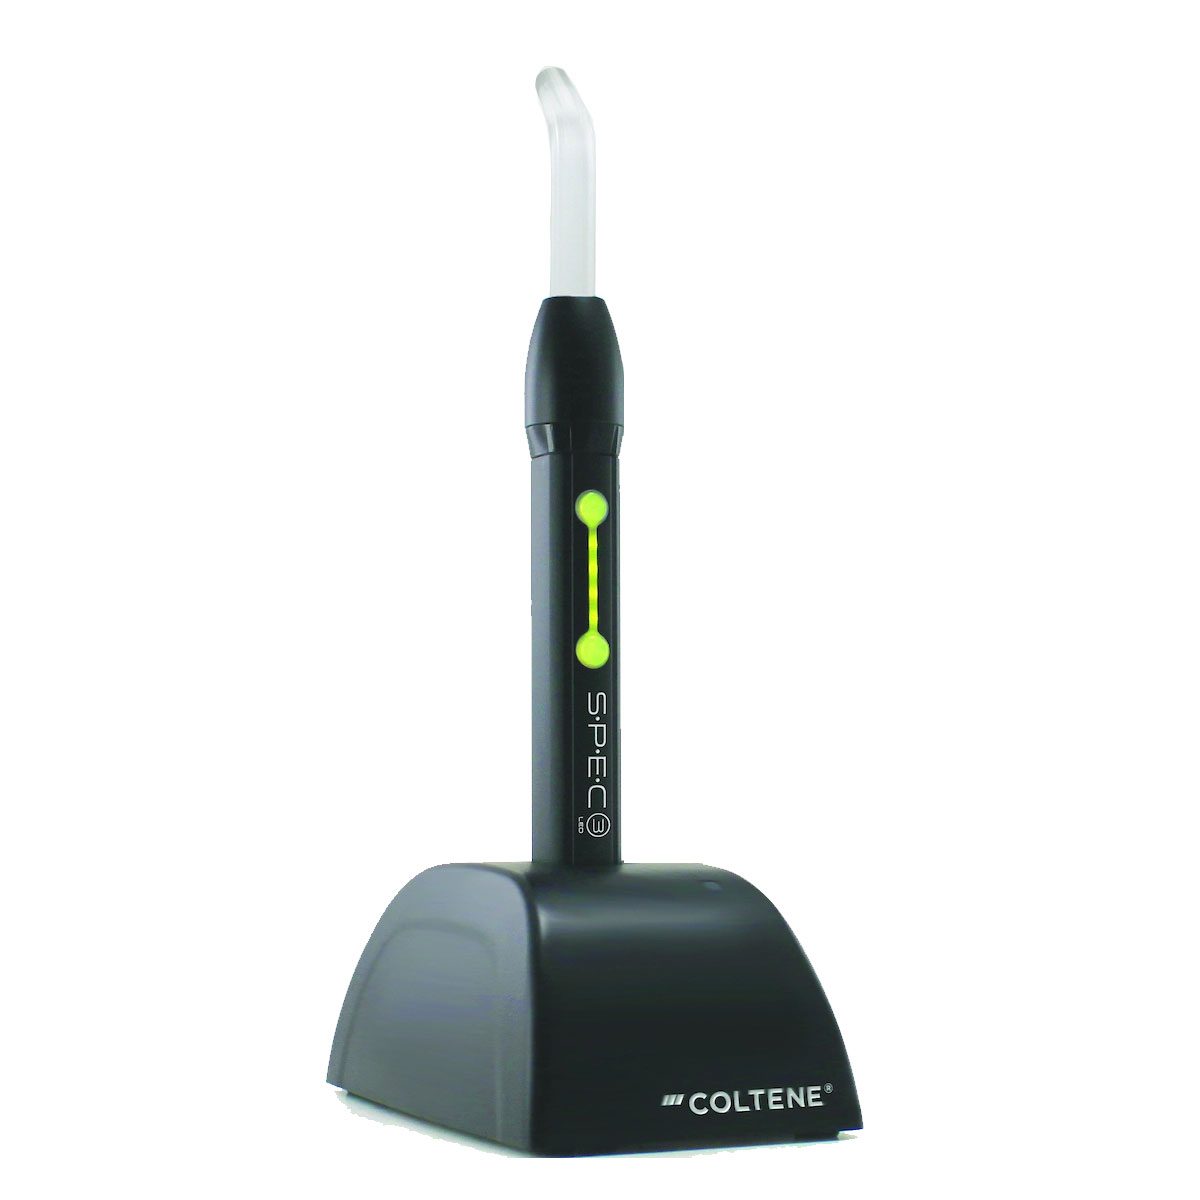 S.P.E.C. 3 Dental Curing Light High-intensity output for rapid polymerization. Standard, 3K and Ortho pre-set modes.